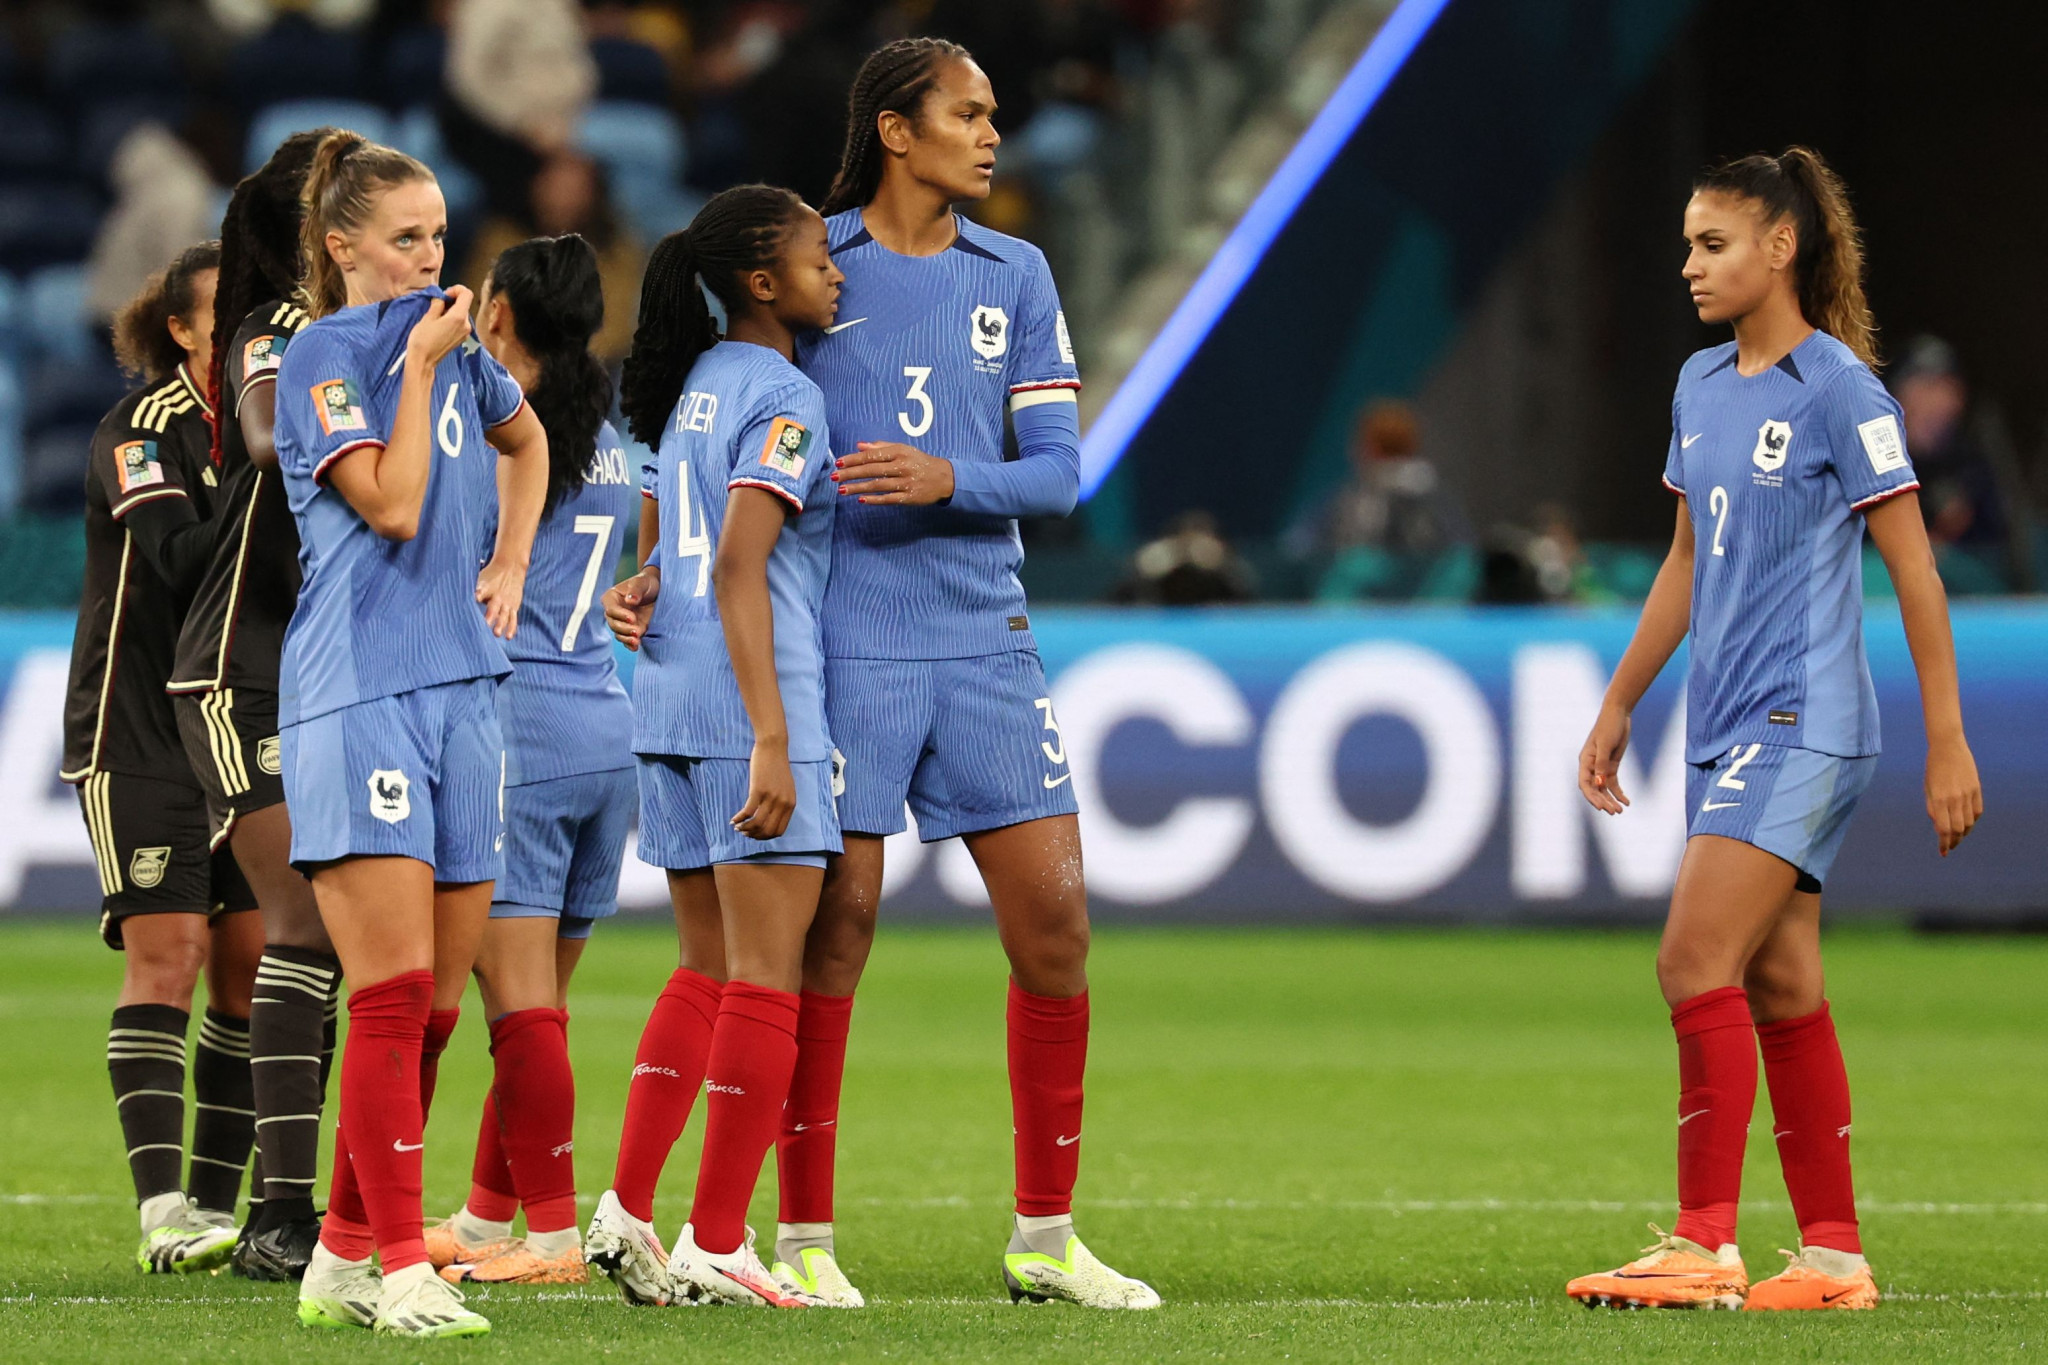 It was a frustrating start to the Women's World Cup for France, who are ranked fifth in the world but could not find a way through against Jamaica ©Getty Images